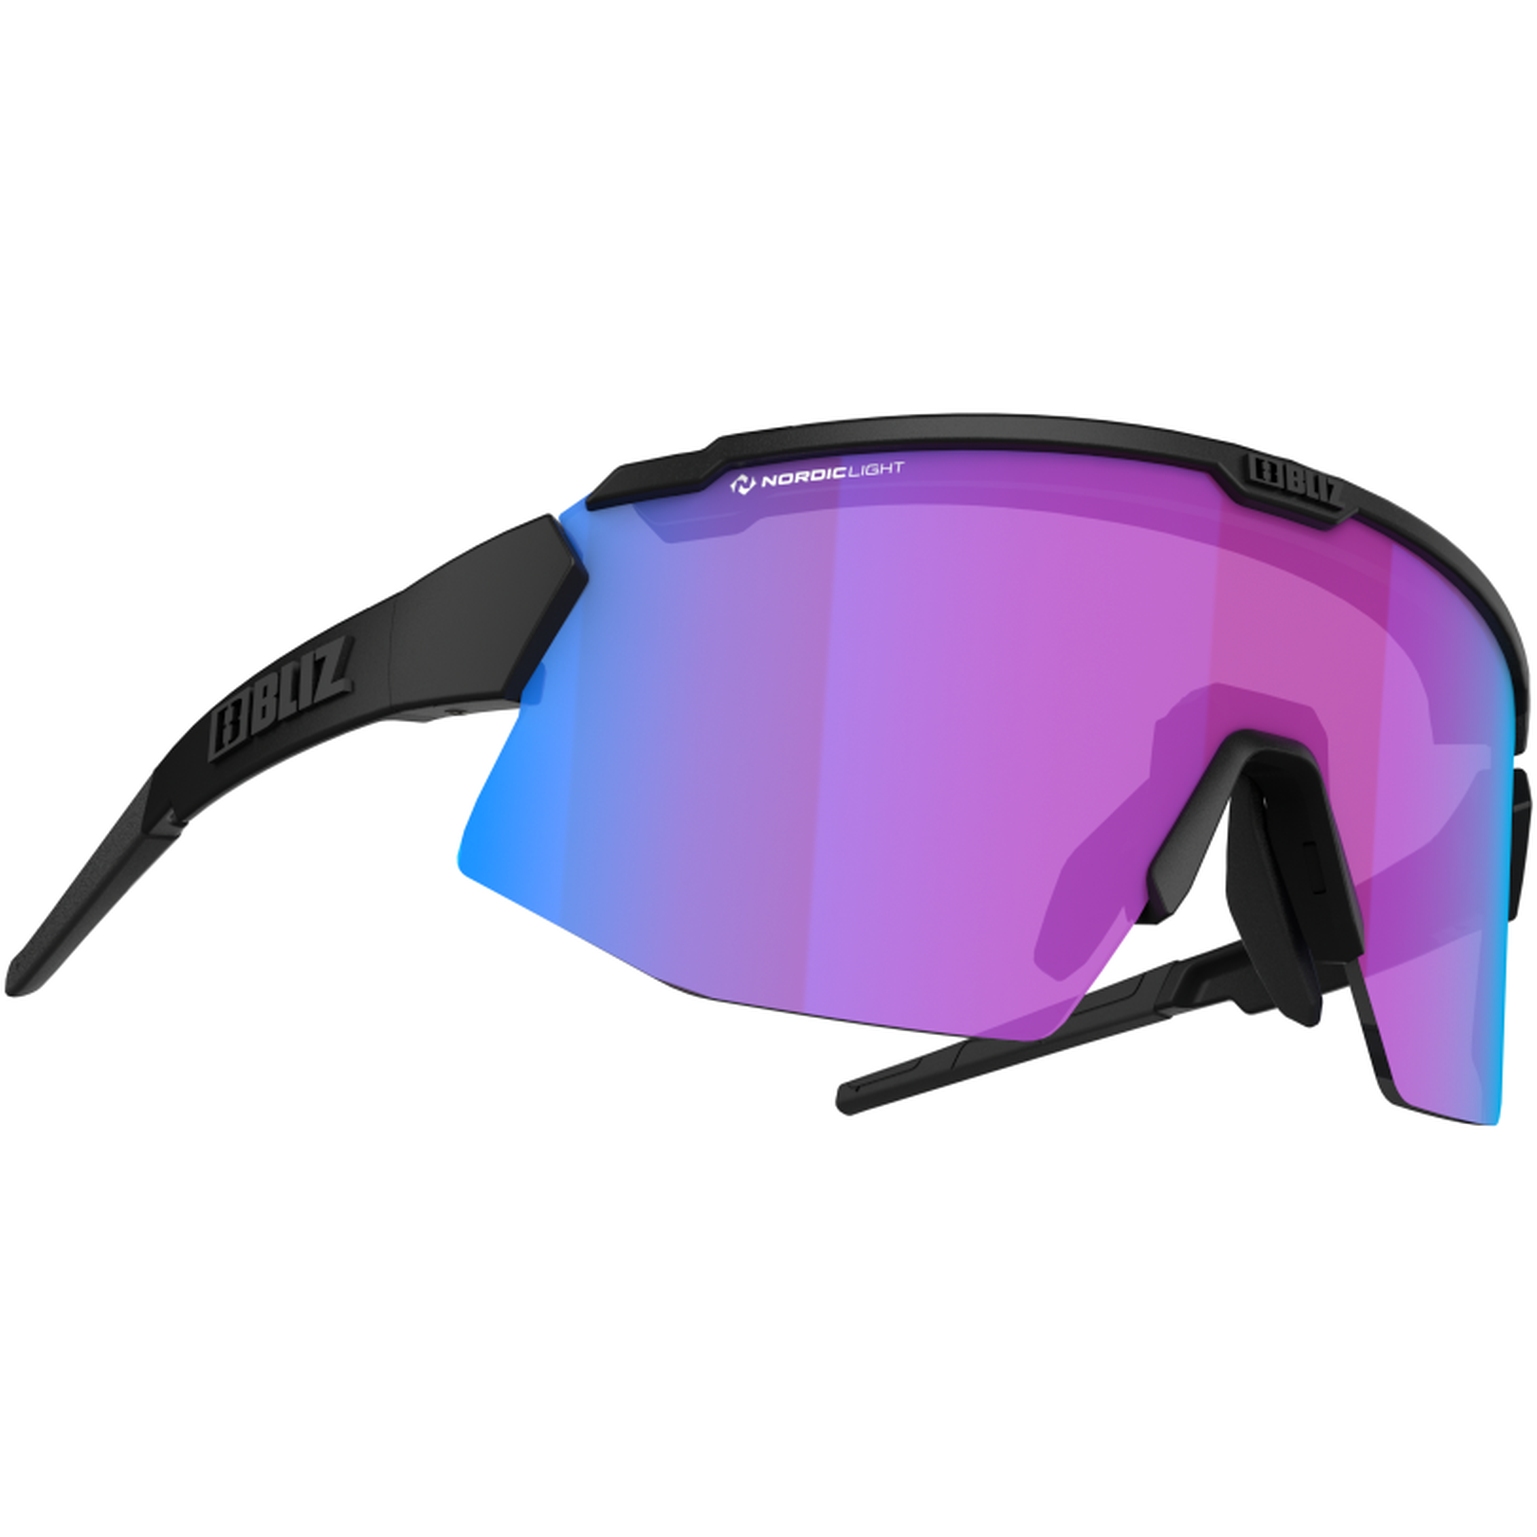 Image of Bliz Breeze Small Nano | Nordic Light - Glasses - Matt Black / Begonia - Violet with Blue Multi + Brown with Silver Mirror